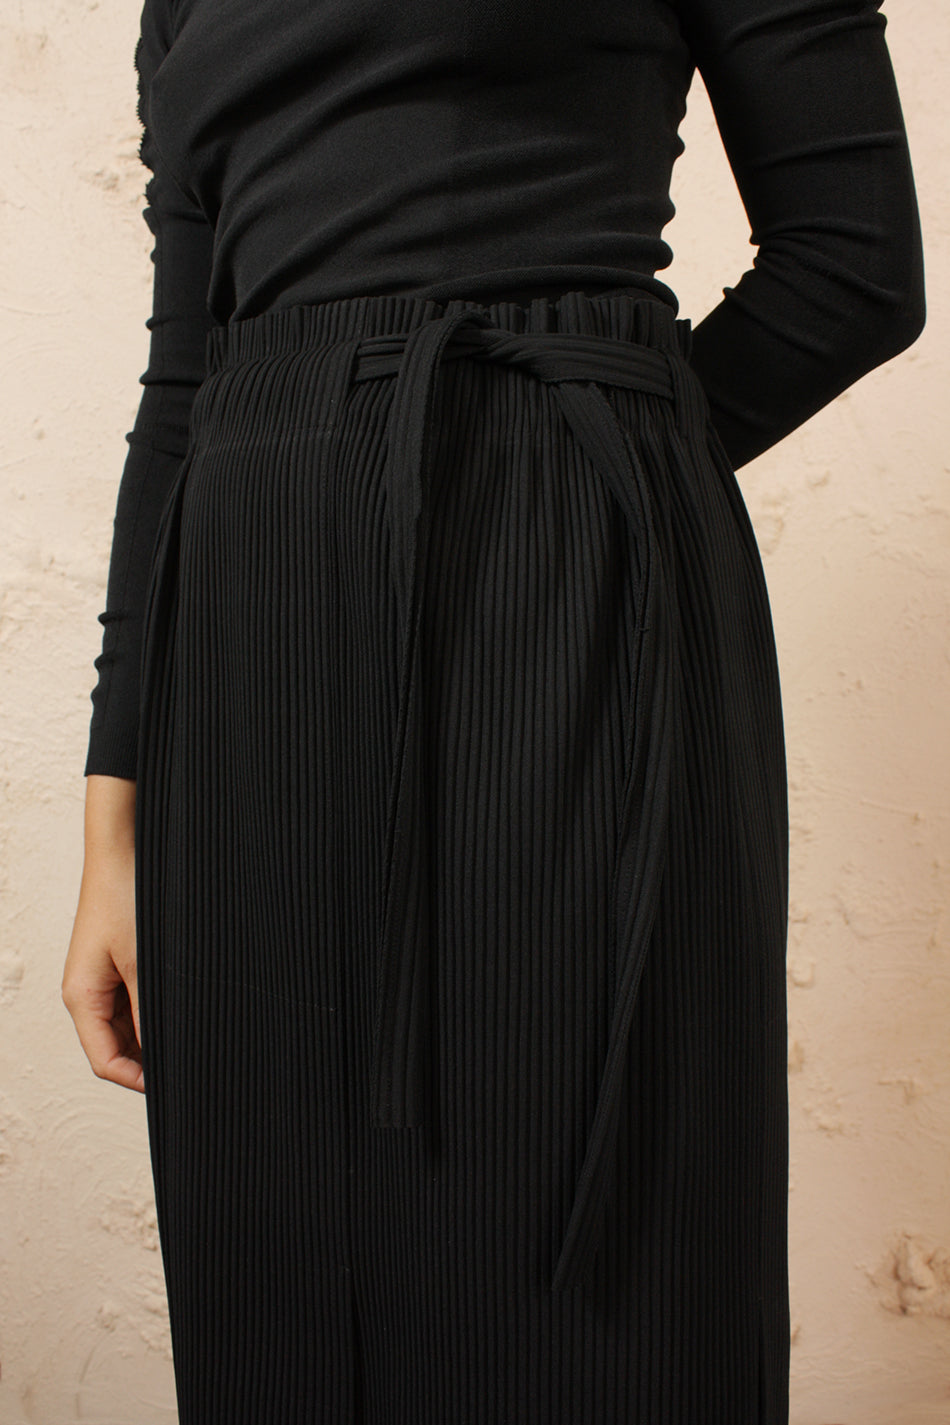 Apoc Belted Skirt